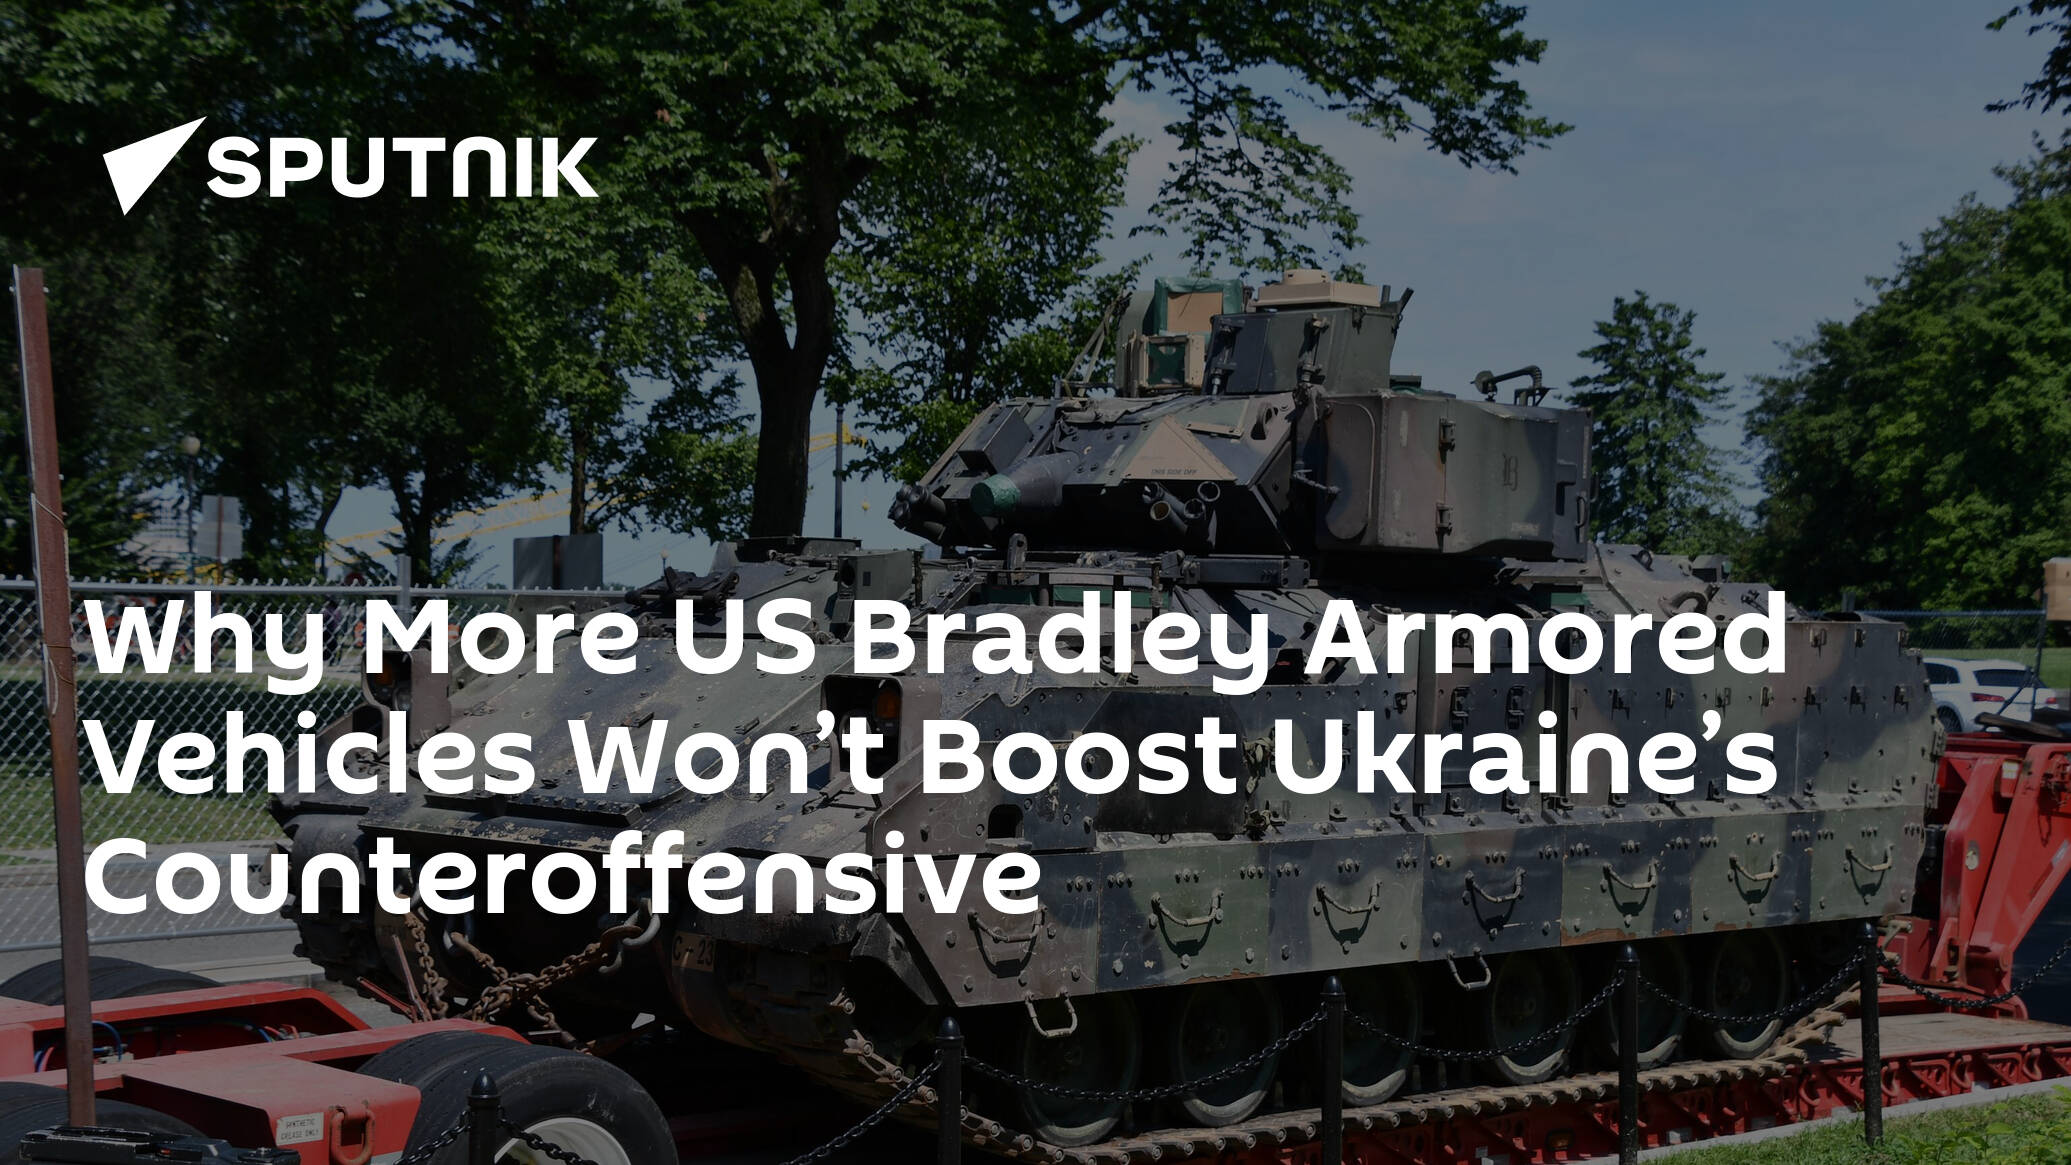 Why More US Bradley Armored Vehicles Won’t Boost Ukraine’s Counteroffensive